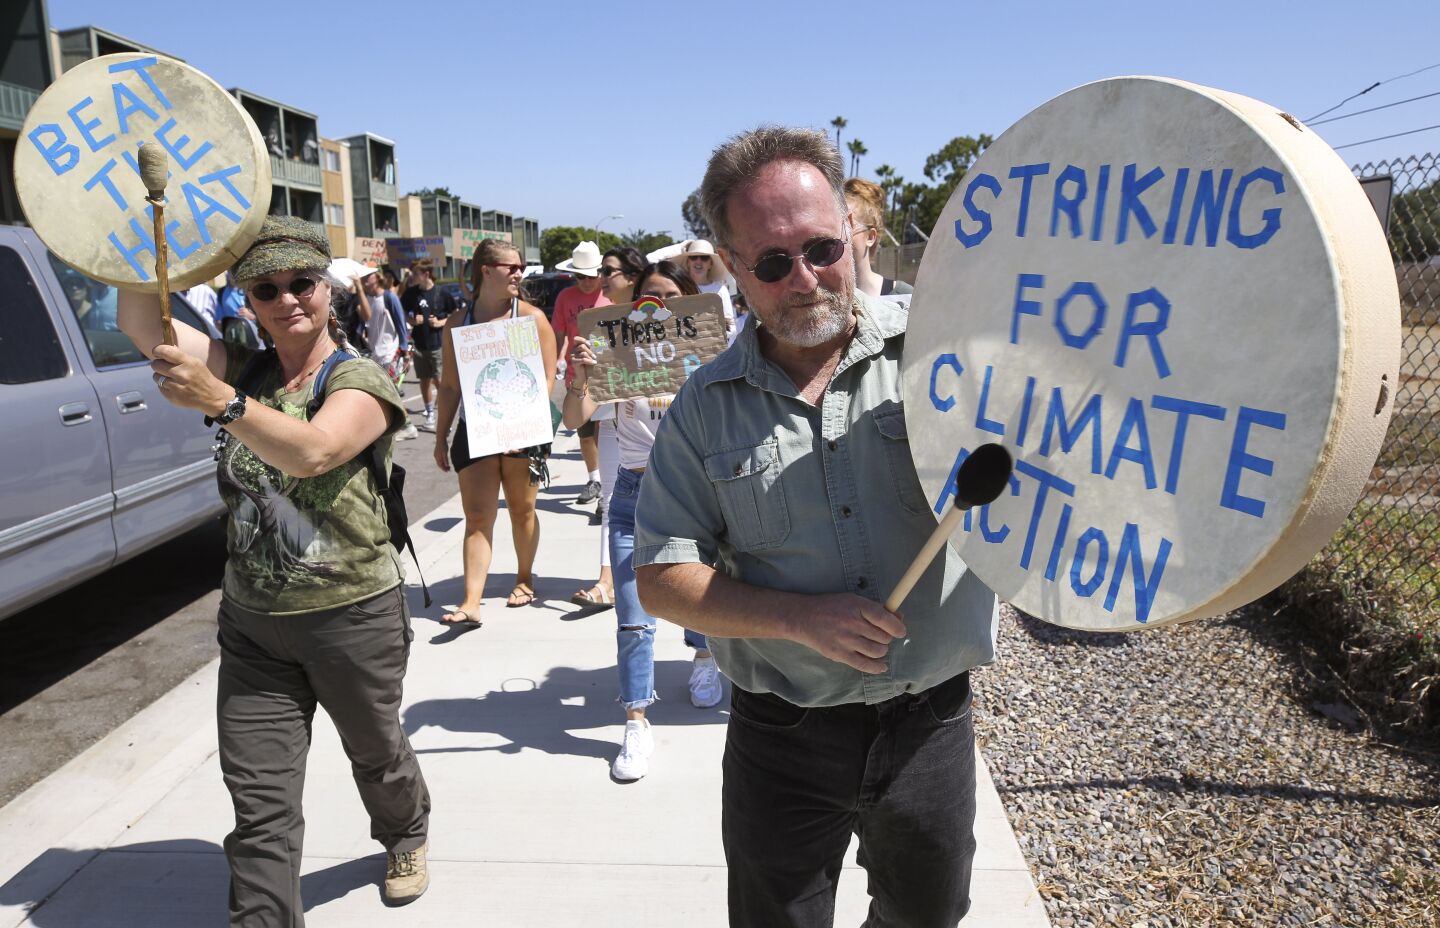 Jon and Sabine Sherman bang drums as they march with Mission Bay High School students participating in the Global Climate Strike in Pacific Beach on Friday, September 20, 2019 in San Diego, California.